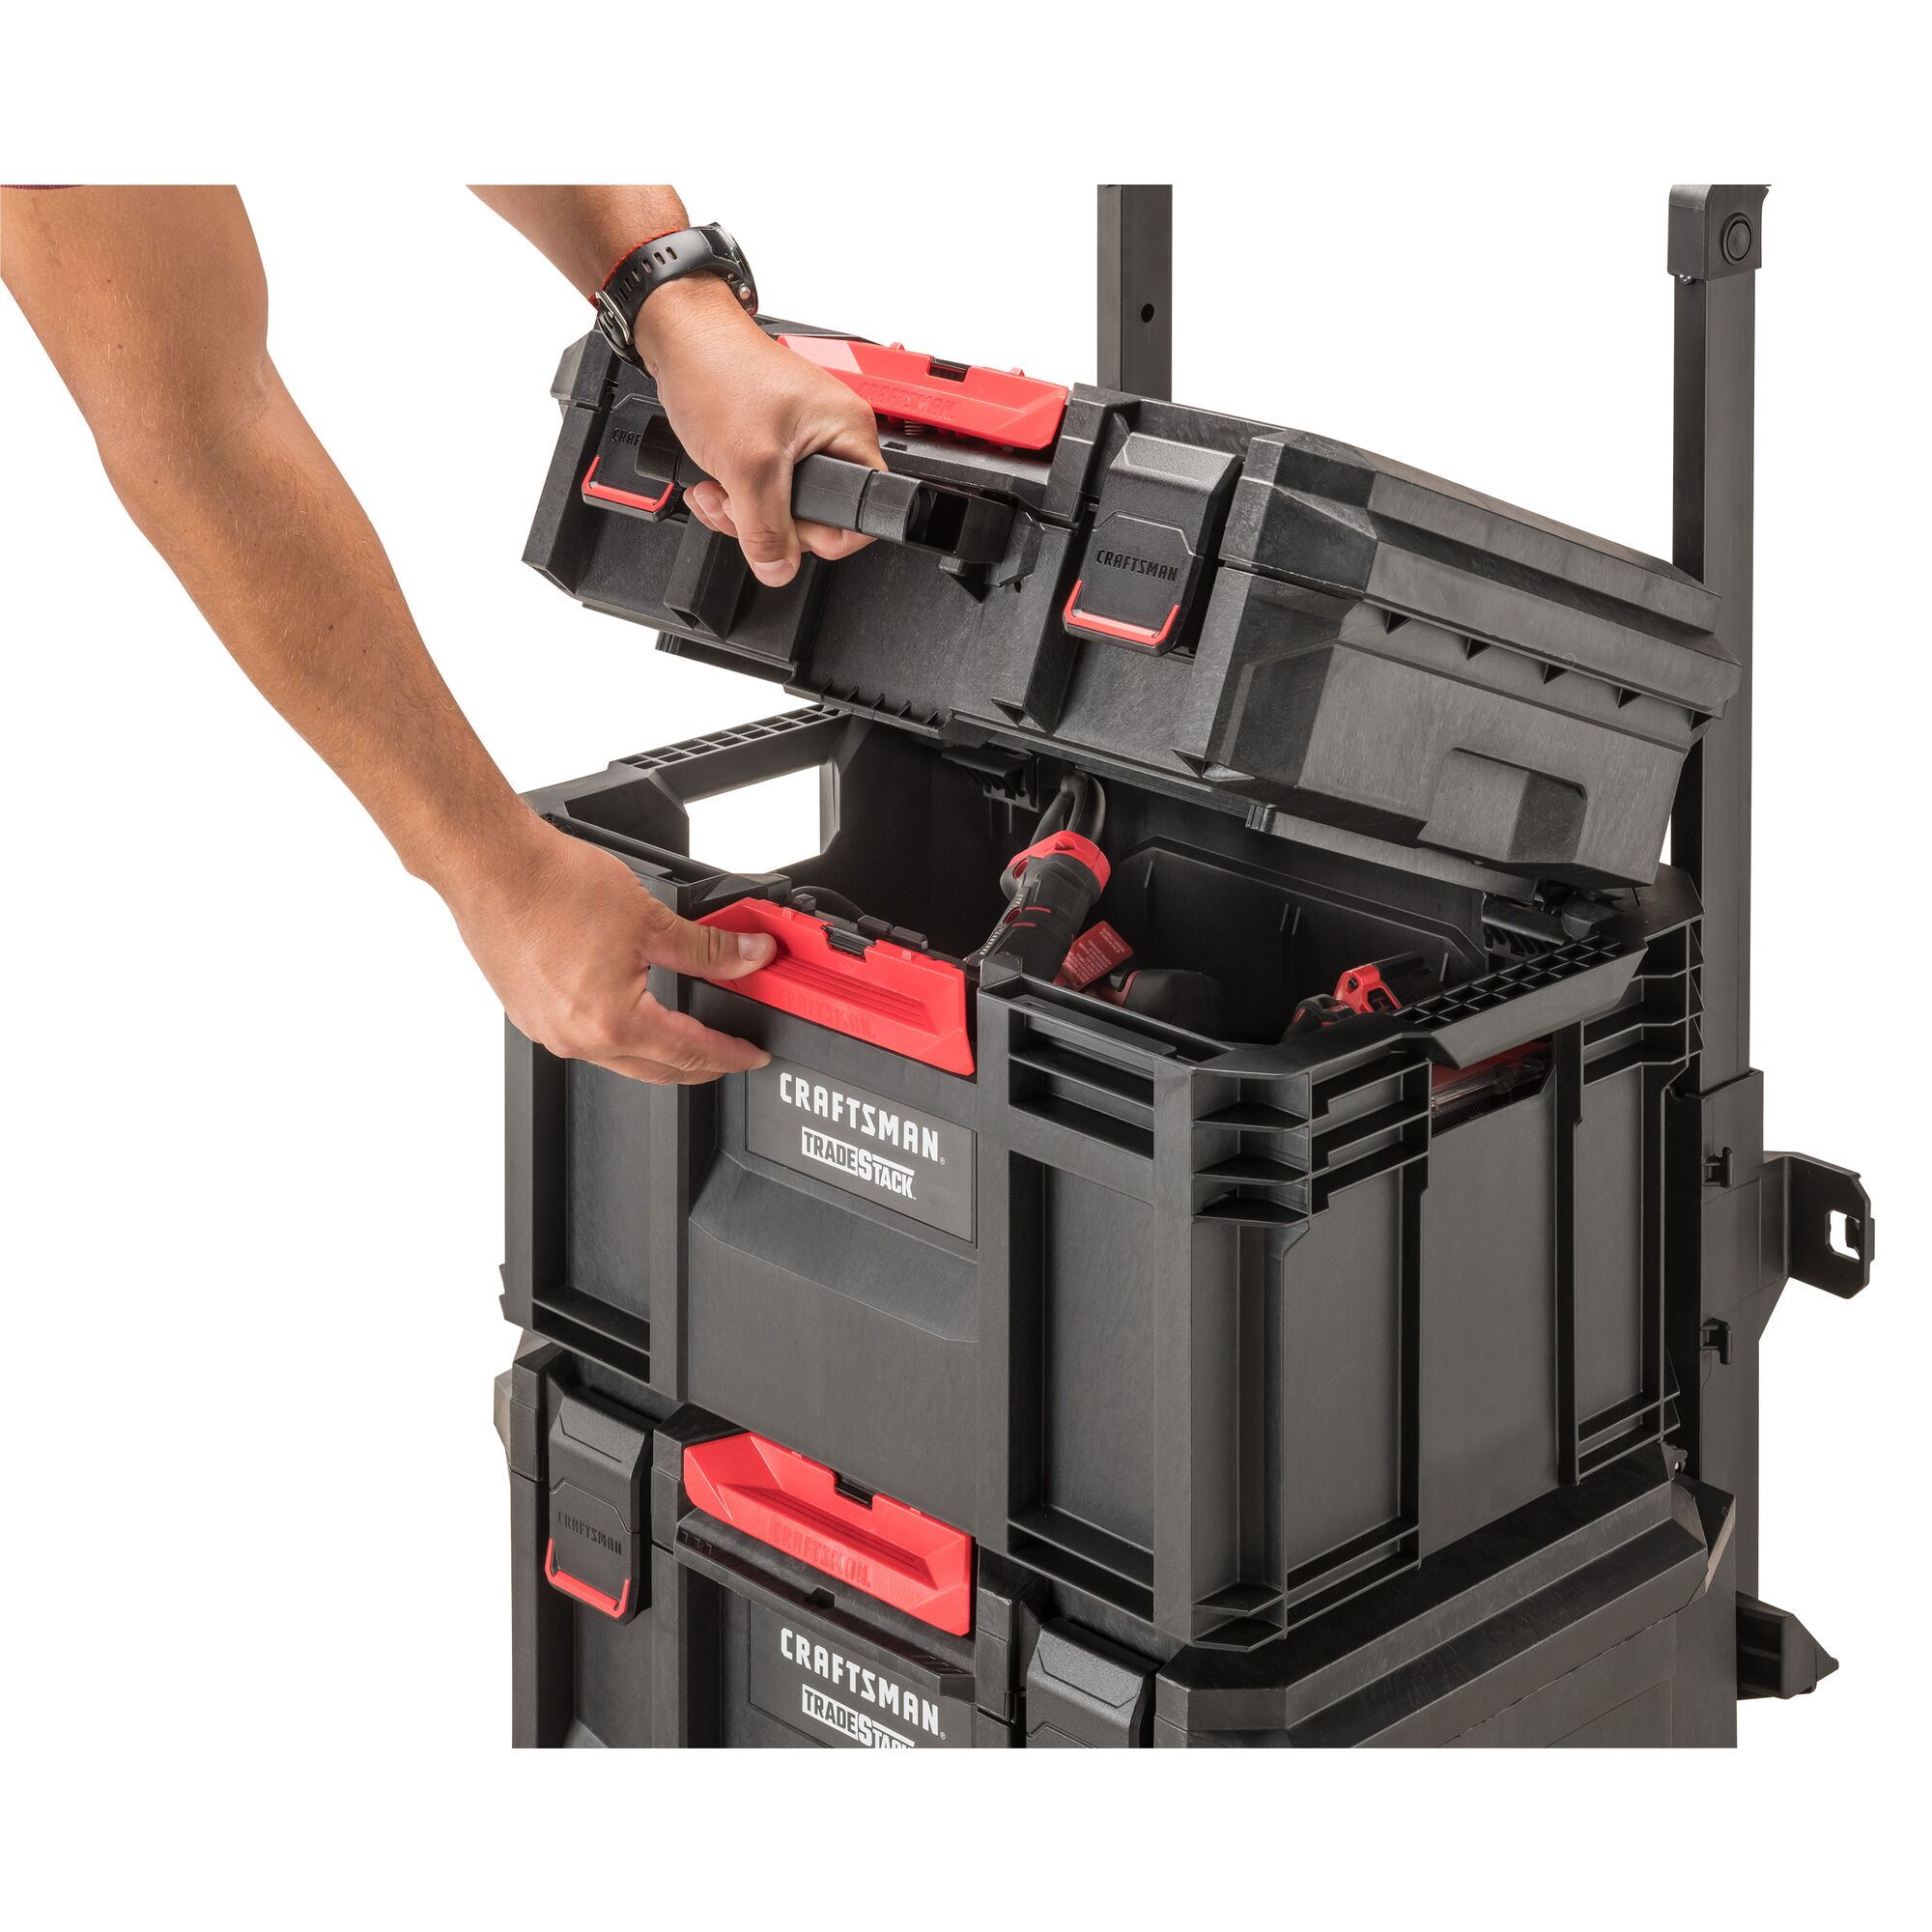 CRAFTSMAN TRADESTACK System 22.6-in Multiple Colors/Finishes Structural  Foam Wheels Lockable Tool Box